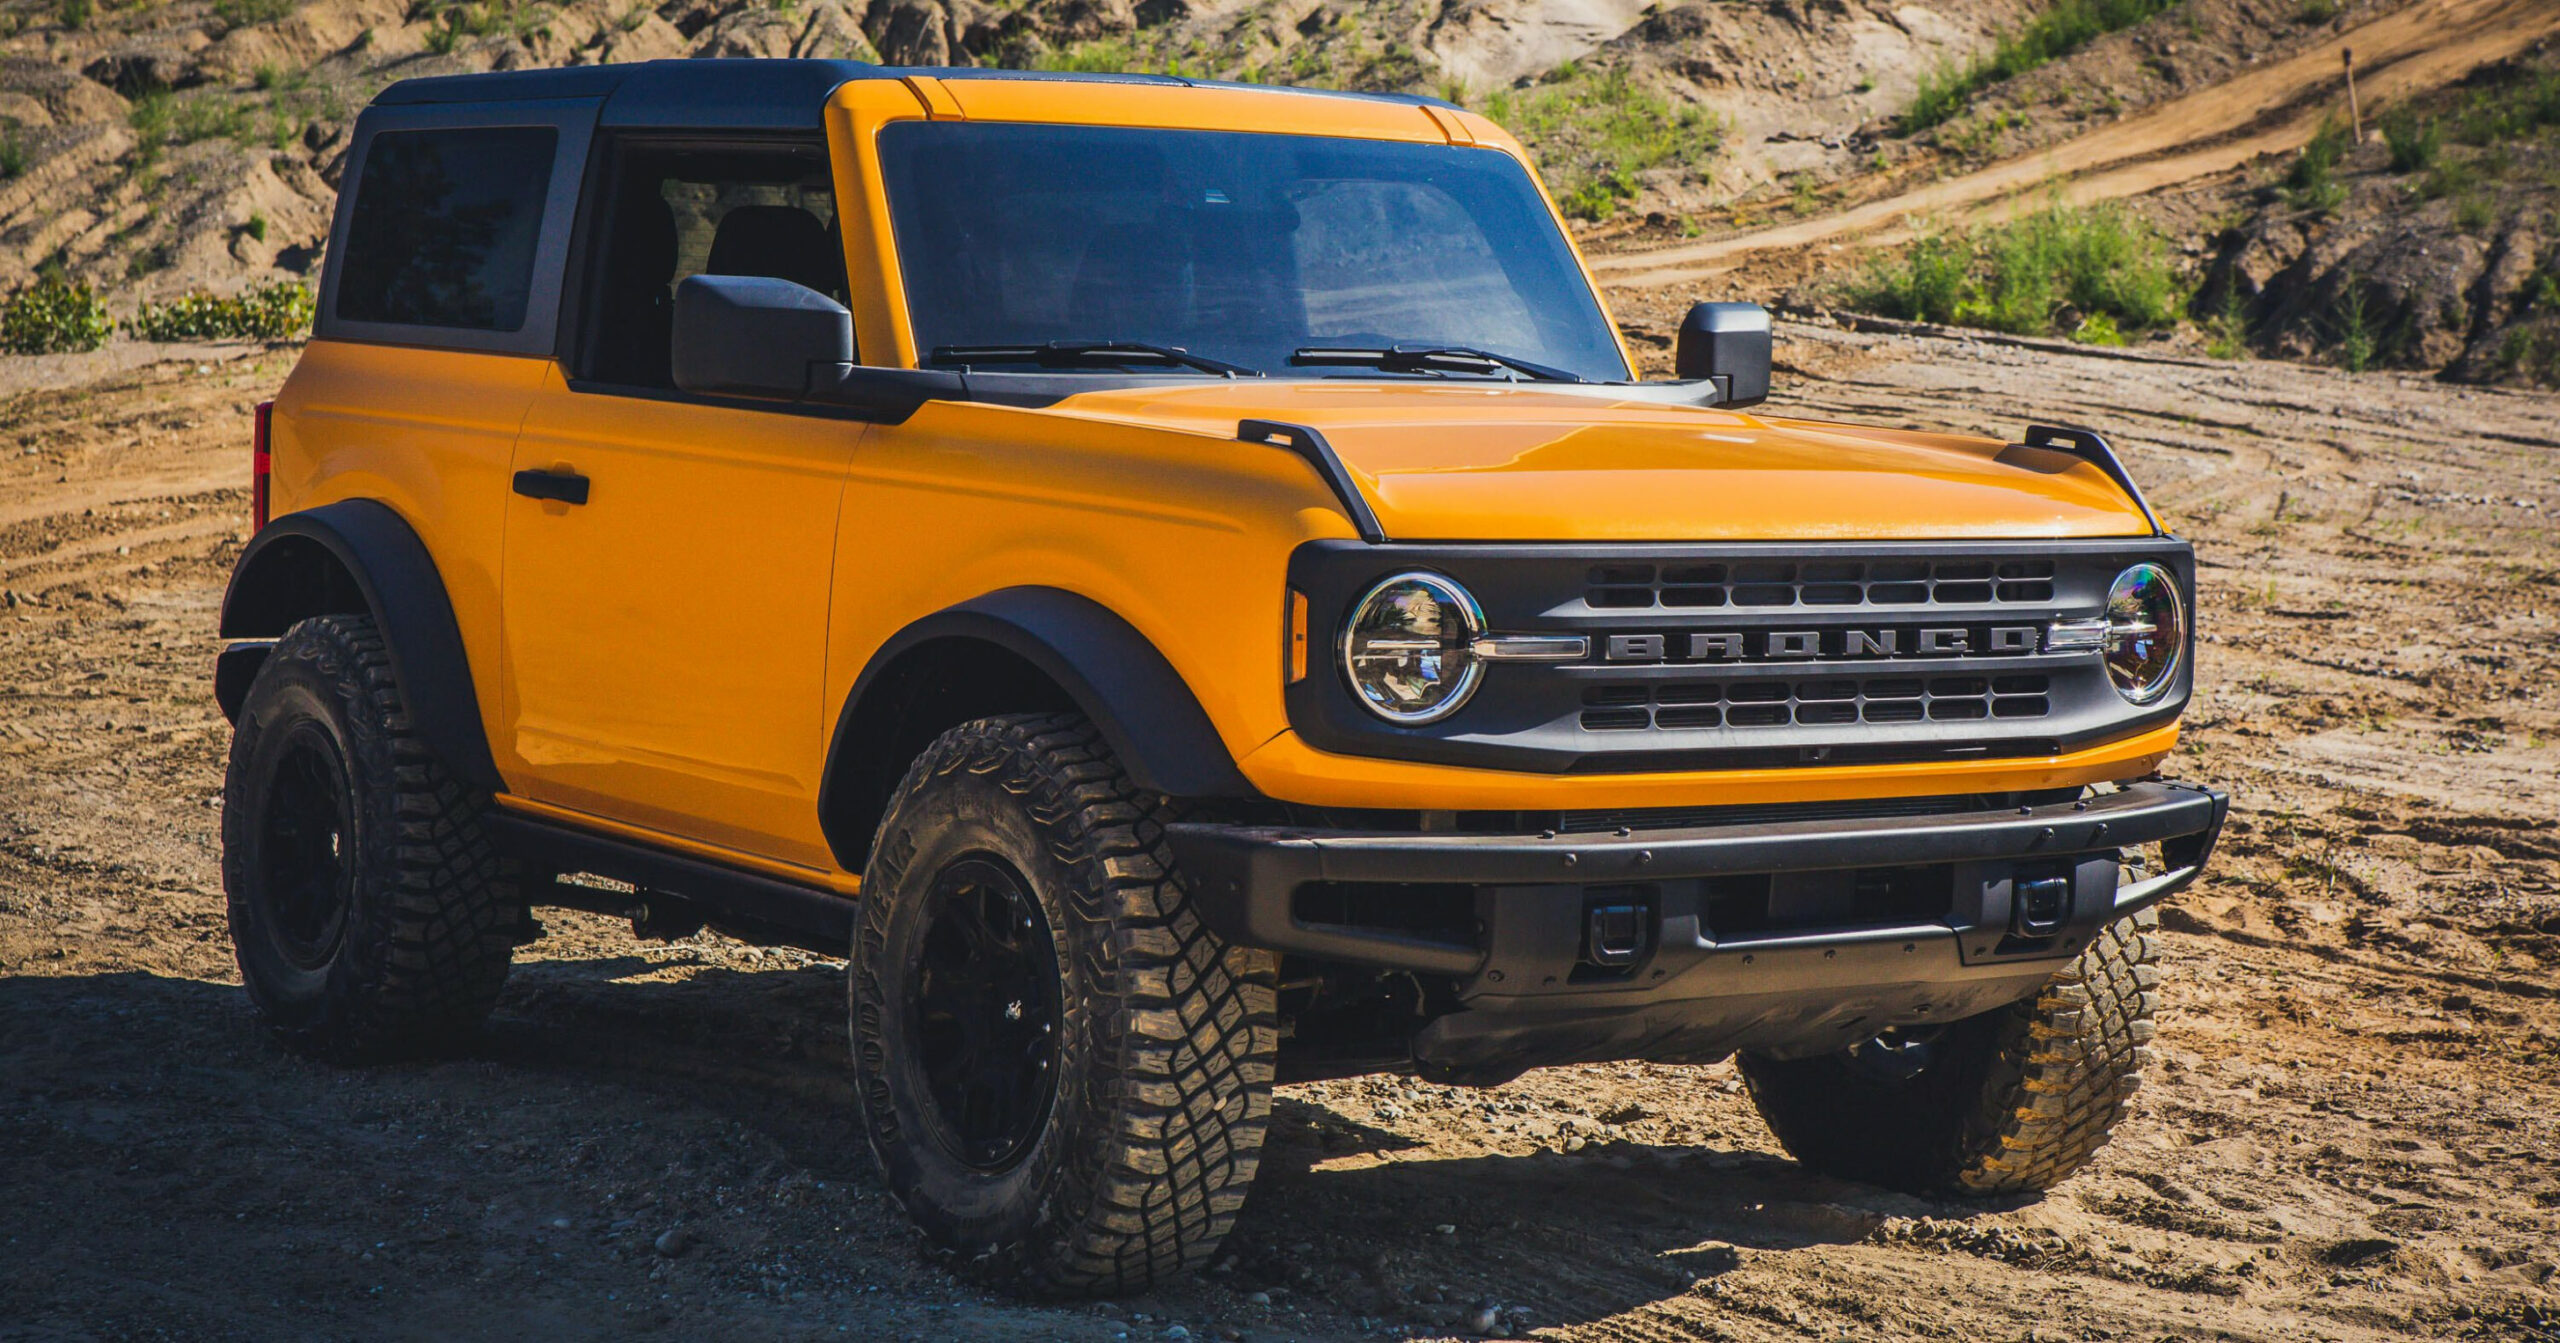 2022 Ford Bronco Latest News - Cars Review : Cars Review